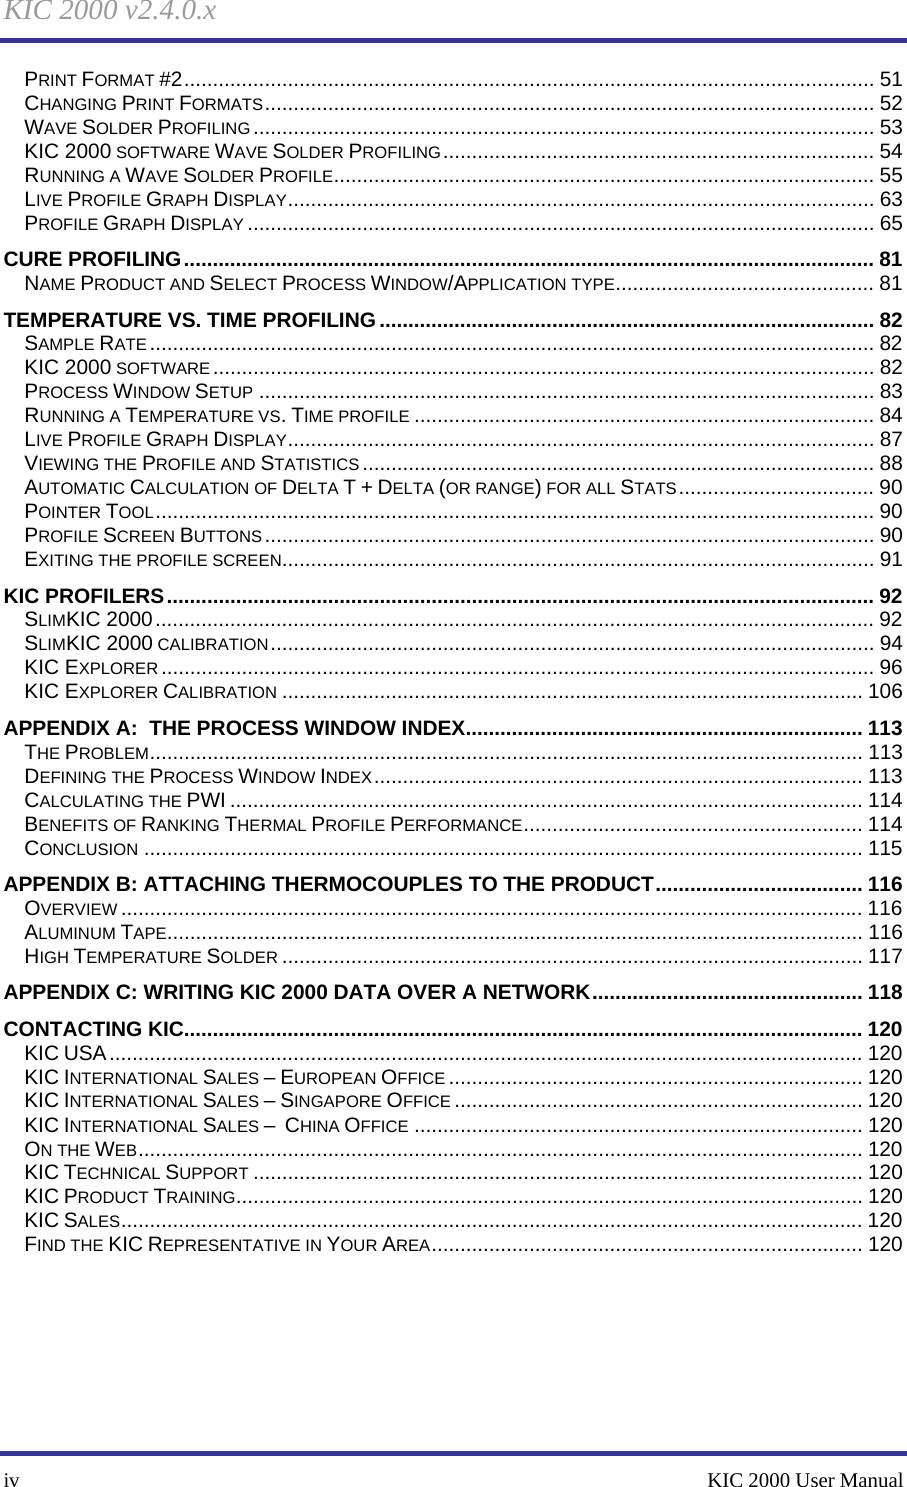 KIC 2000 v2.4.0.x iv    KIC 2000 User Manual PRINT FORMAT #2........................................................................................................................ 51 CHANGING PRINT FORMATS.......................................................................................................... 52 WAVE SOLDER PROFILING ............................................................................................................ 53 KIC 2000 SOFTWARE WAVE SOLDER PROFILING........................................................................... 54 RUNNING A WAVE SOLDER PROFILE.............................................................................................. 55 LIVE PROFILE GRAPH DISPLAY...................................................................................................... 63 PROFILE GRAPH DISPLAY ............................................................................................................. 65 CURE PROFILING........................................................................................................................ 81 NAME PRODUCT AND SELECT PROCESS WINDOW/APPLICATION TYPE............................................. 81 TEMPERATURE VS. TIME PROFILING...................................................................................... 82 SAMPLE RATE .............................................................................................................................. 82 KIC 2000 SOFTWARE................................................................................................................... 82 PROCESS WINDOW SETUP ........................................................................................................... 83 RUNNING A TEMPERATURE VS. TIME PROFILE ................................................................................ 84 LIVE PROFILE GRAPH DISPLAY...................................................................................................... 87 VIEWING THE PROFILE AND STATISTICS ......................................................................................... 88 AUTOMATIC CALCULATION OF DELTA T + DELTA (OR RANGE) FOR ALL STATS.................................. 90 POINTER TOOL............................................................................................................................. 90 PROFILE SCREEN BUTTONS.......................................................................................................... 90 EXITING THE PROFILE SCREEN....................................................................................................... 91 KIC PROFILERS........................................................................................................................... 92 SLIMKIC 2000............................................................................................................................. 92 SLIMKIC 2000 CALIBRATION......................................................................................................... 94 KIC EXPLORER ............................................................................................................................ 96 KIC EXPLORER CALIBRATION ..................................................................................................... 106 APPENDIX A:  THE PROCESS WINDOW INDEX..................................................................... 113 THE PROBLEM............................................................................................................................ 113 DEFINING THE PROCESS WINDOW INDEX..................................................................................... 113 CALCULATING THE PWI .............................................................................................................. 114 BENEFITS OF RANKING THERMAL PROFILE PERFORMANCE........................................................... 114 CONCLUSION ............................................................................................................................. 115 APPENDIX B: ATTACHING THERMOCOUPLES TO THE PRODUCT.................................... 116 OVERVIEW ................................................................................................................................. 116 ALUMINUM TAPE......................................................................................................................... 116 HIGH TEMPERATURE SOLDER ..................................................................................................... 117 APPENDIX C: WRITING KIC 2000 DATA OVER A NETWORK............................................... 118 CONTACTING KIC...................................................................................................................... 120 KIC USA................................................................................................................................... 120 KIC INTERNATIONAL SALES – EUROPEAN OFFICE ........................................................................ 120 KIC INTERNATIONAL SALES – SINGAPORE OFFICE ....................................................................... 120 KIC INTERNATIONAL SALES –  CHINA OFFICE .............................................................................. 120 ON THE WEB.............................................................................................................................. 120 KIC TECHNICAL SUPPORT .......................................................................................................... 120 KIC PRODUCT TRAINING............................................................................................................. 120 KIC SALES................................................................................................................................. 120 FIND THE KIC REPRESENTATIVE IN YOUR AREA........................................................................... 120     